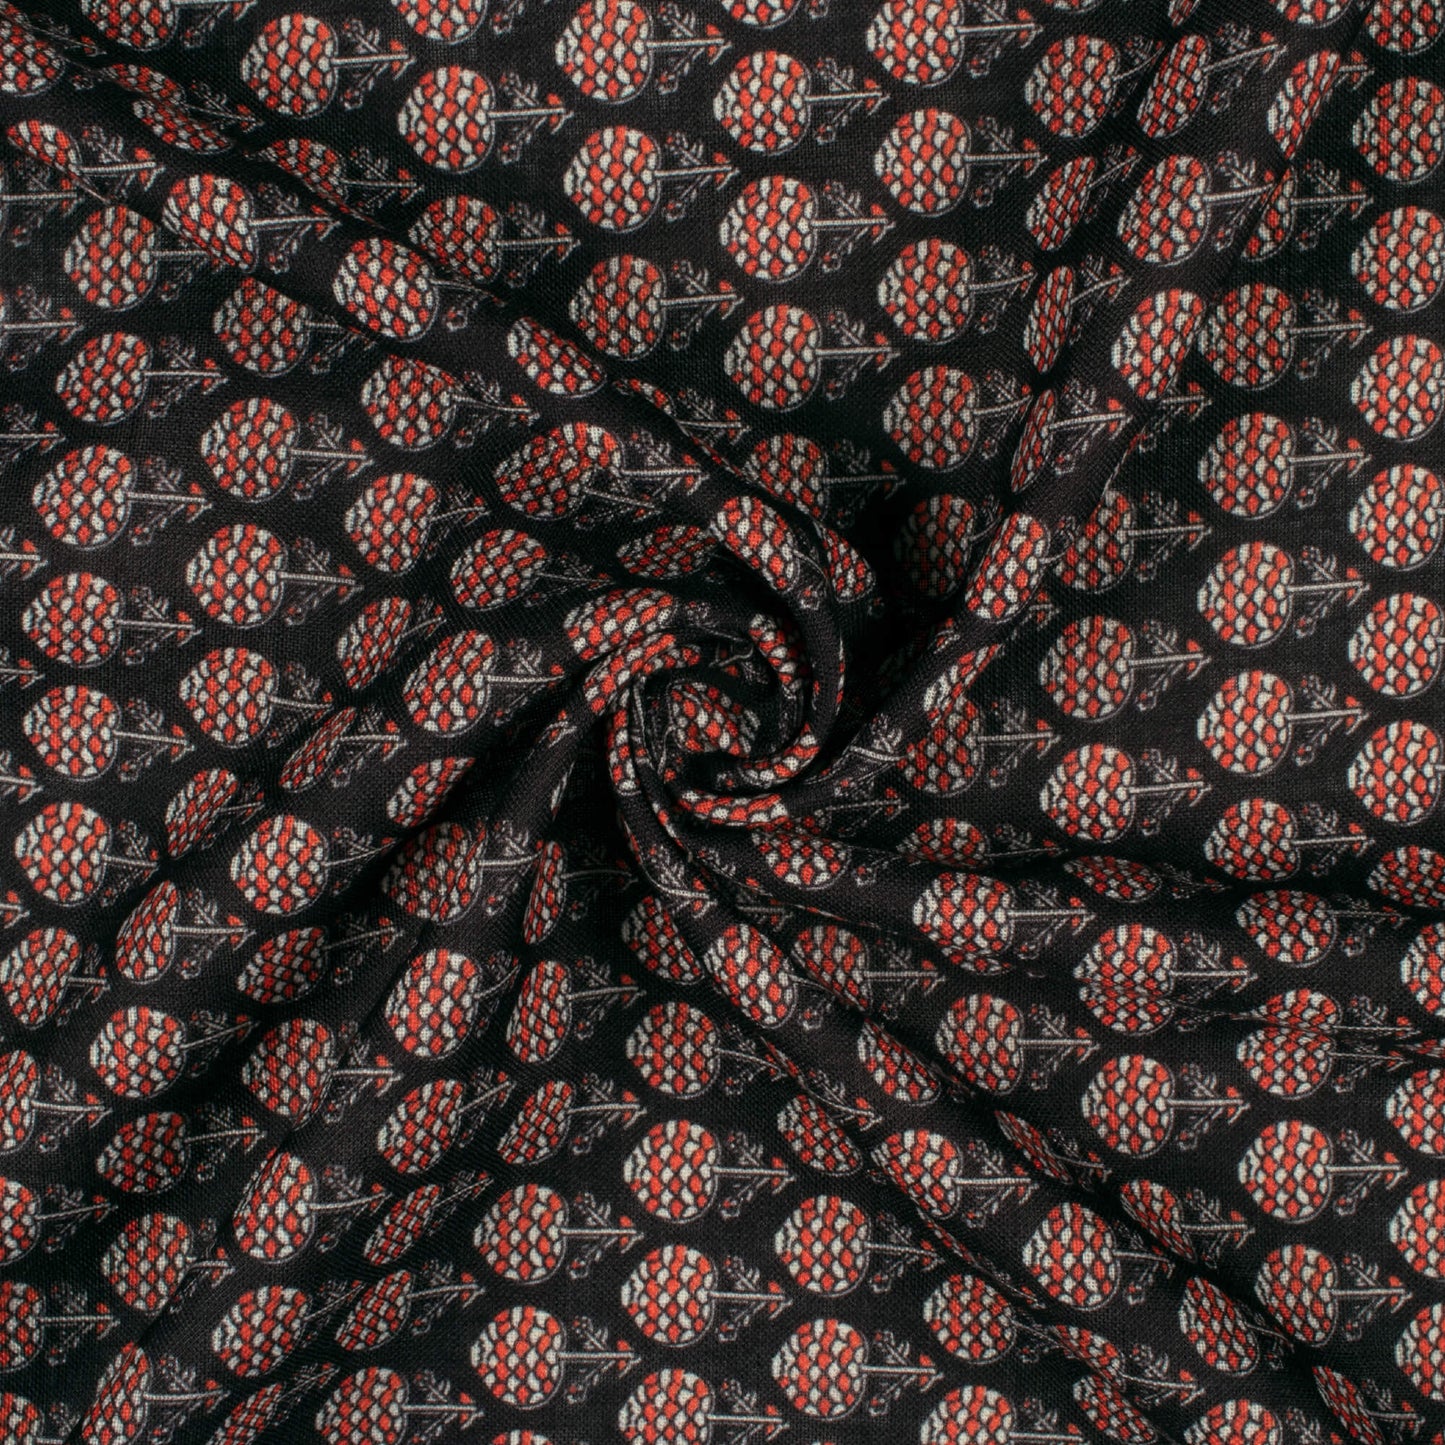 Black And Brick Red Floral Pattern Digital Print Linen Textured Fabric (Width 56 Inches)